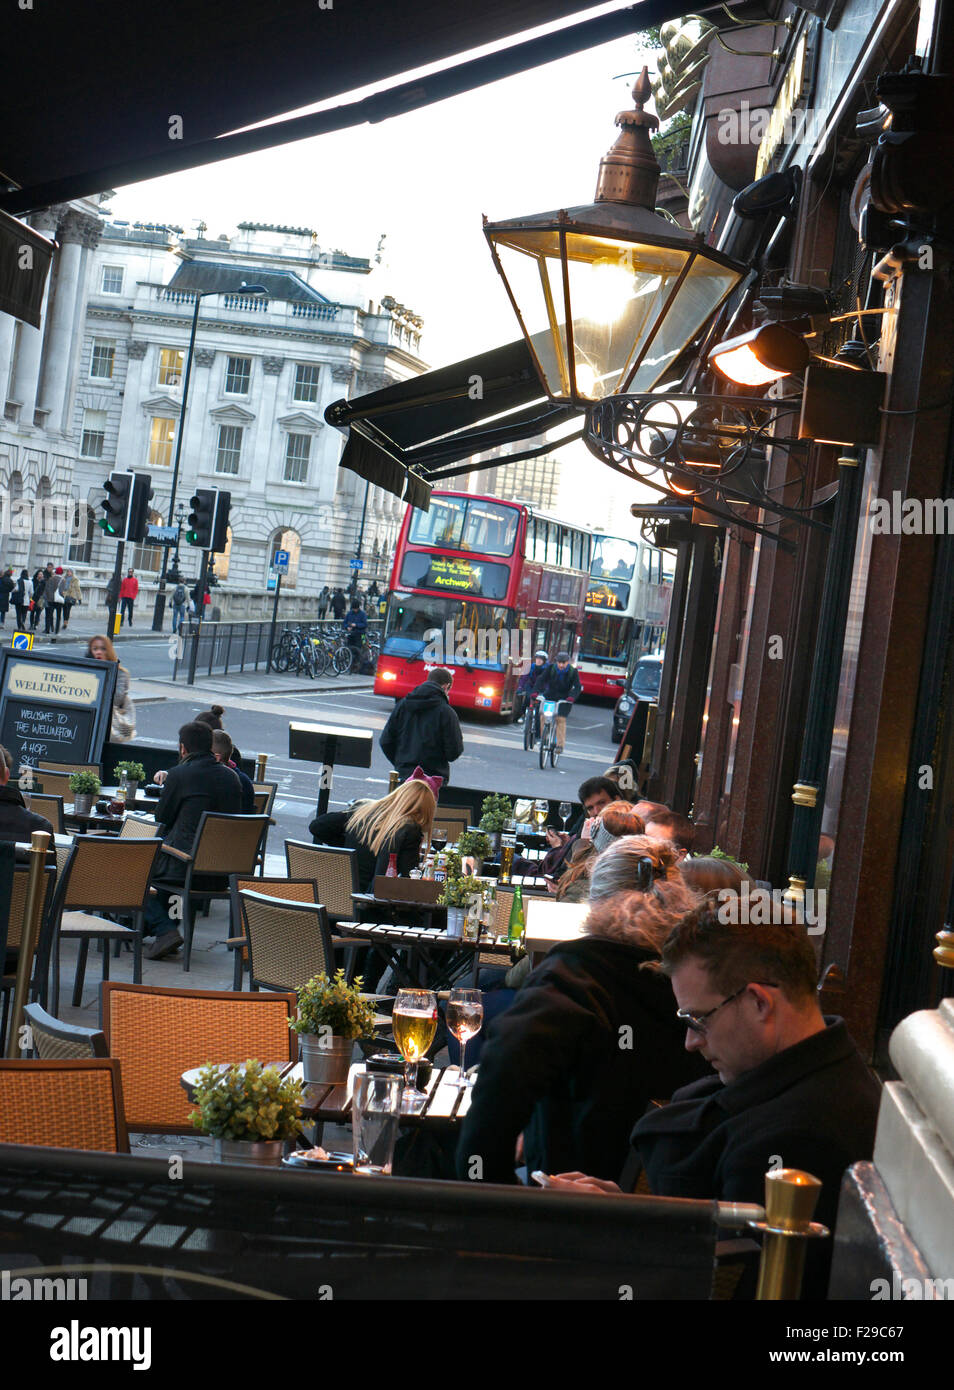 ALFRESCO DRINKING OUTDOORS AFTER WORK STREET Busy London scene at dusk with red bus commuters and typical pub in foreground The Strand London WC2 Stock Photo